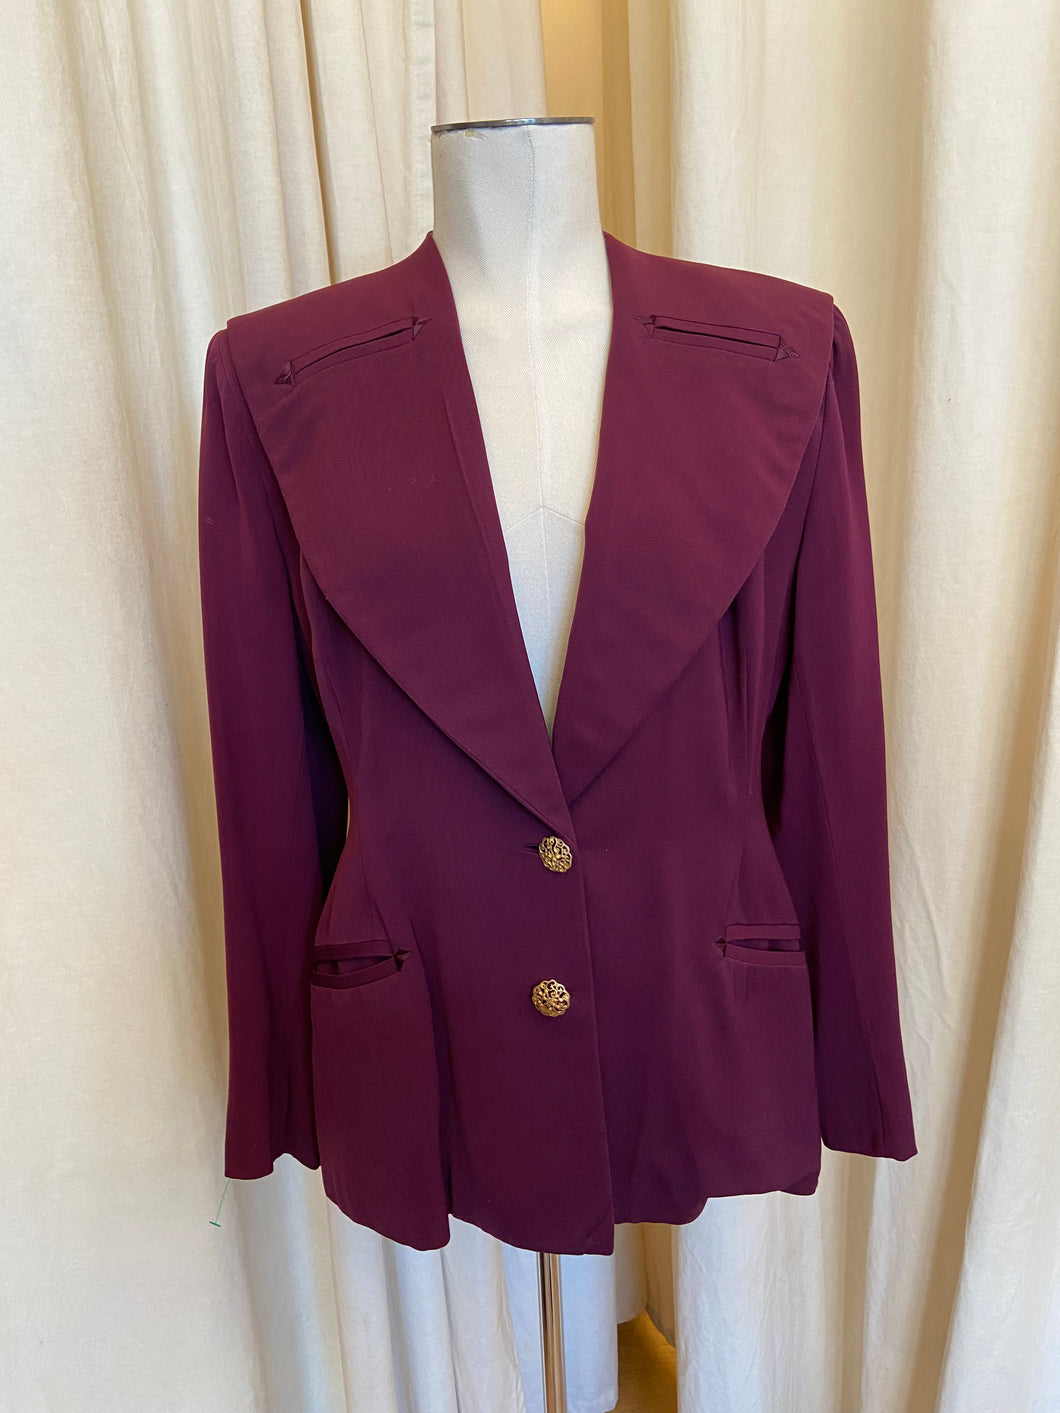 1940s Maroon Blazer with New Gold Buttons